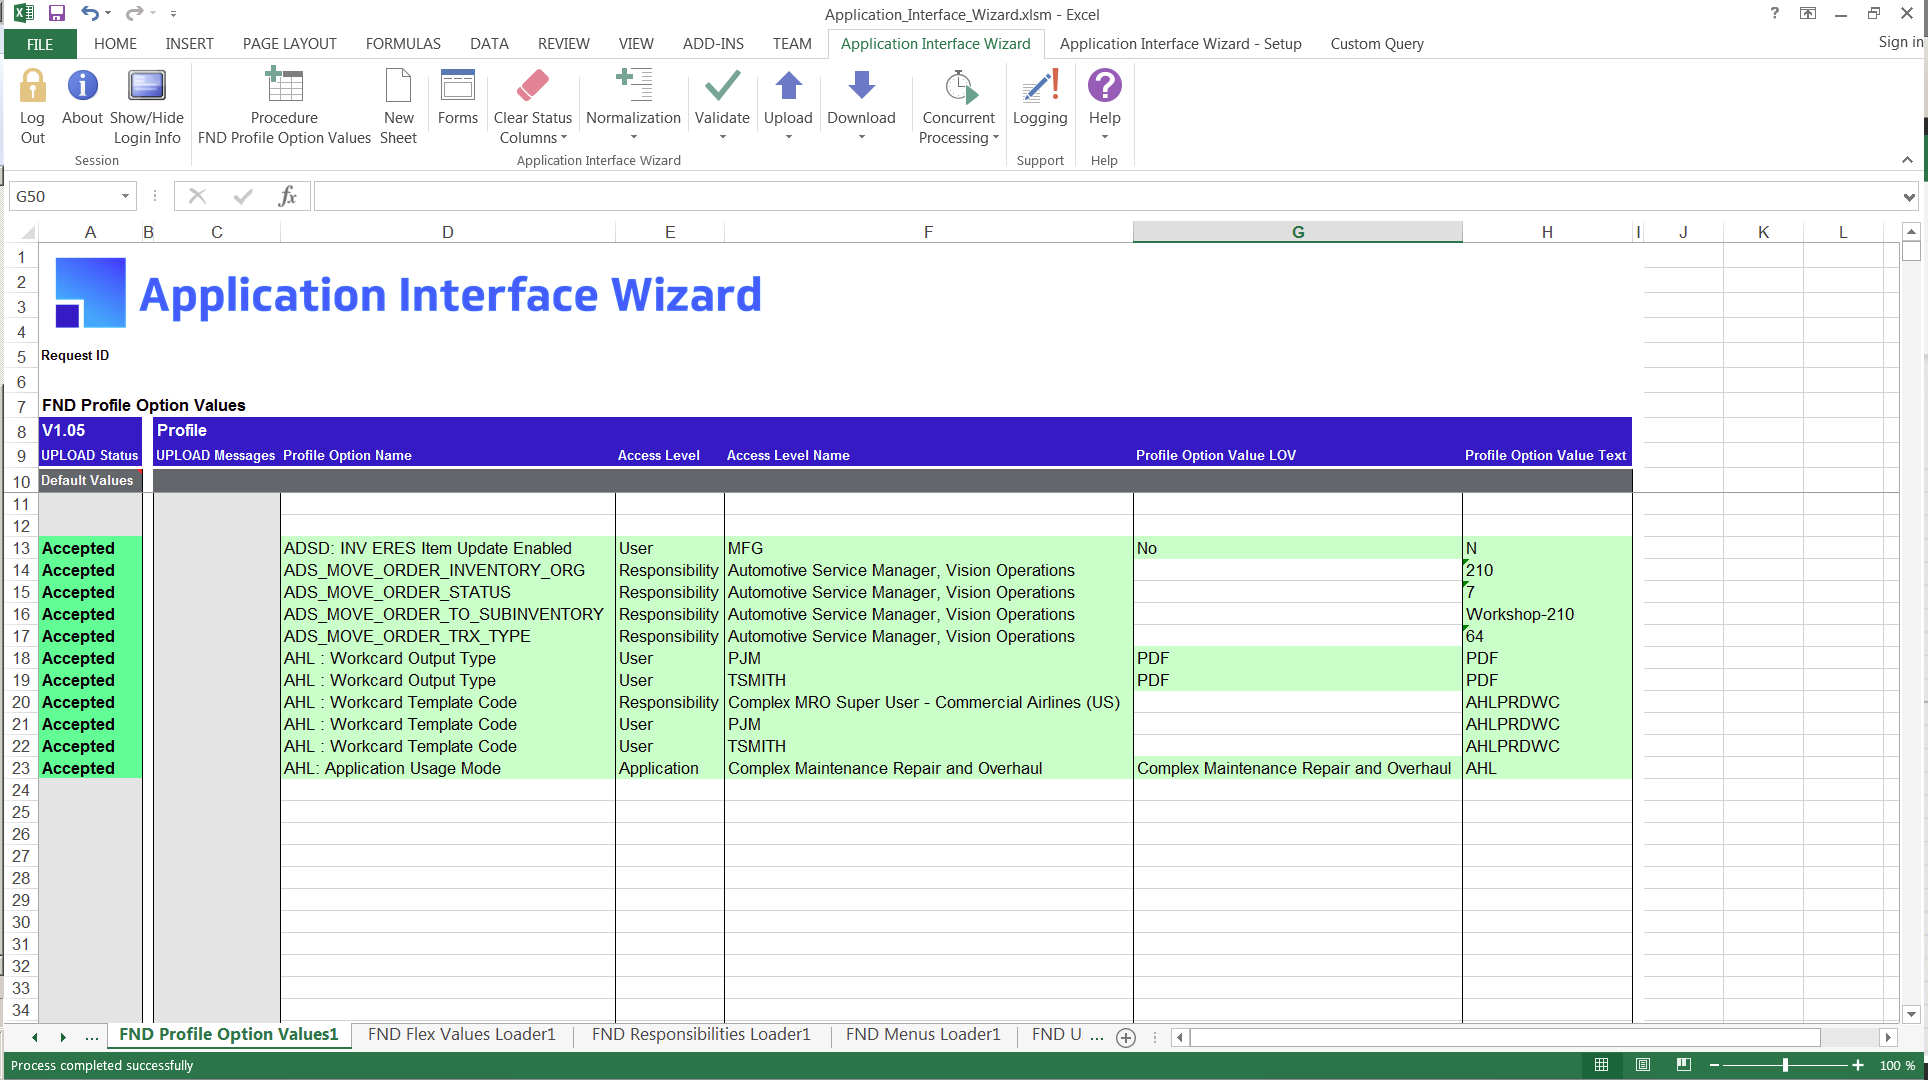 More4apps Application Interface Wizard for System Administration Professionals